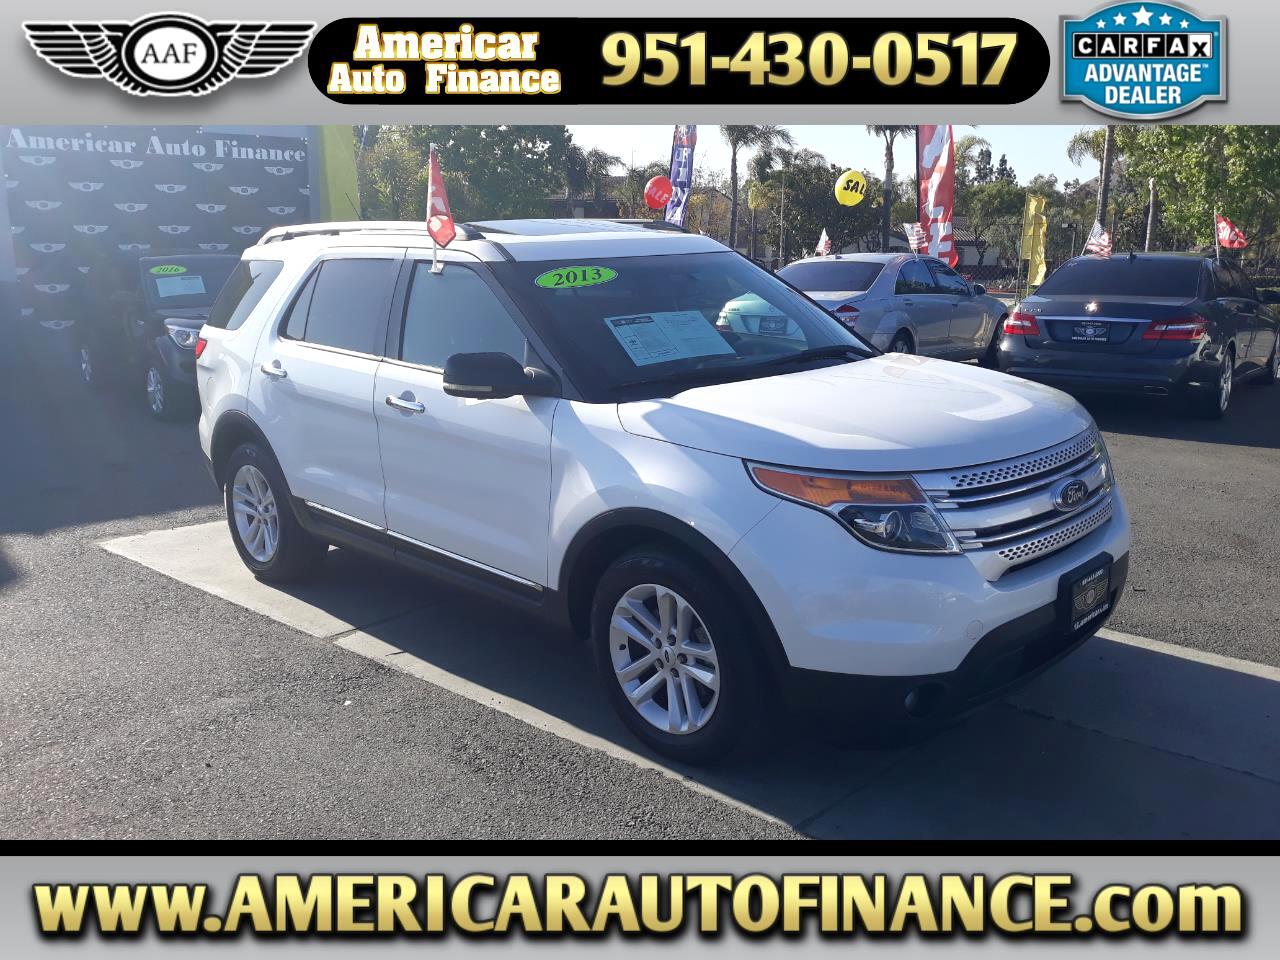 Used Ford Explorer Moreno Valley Ca